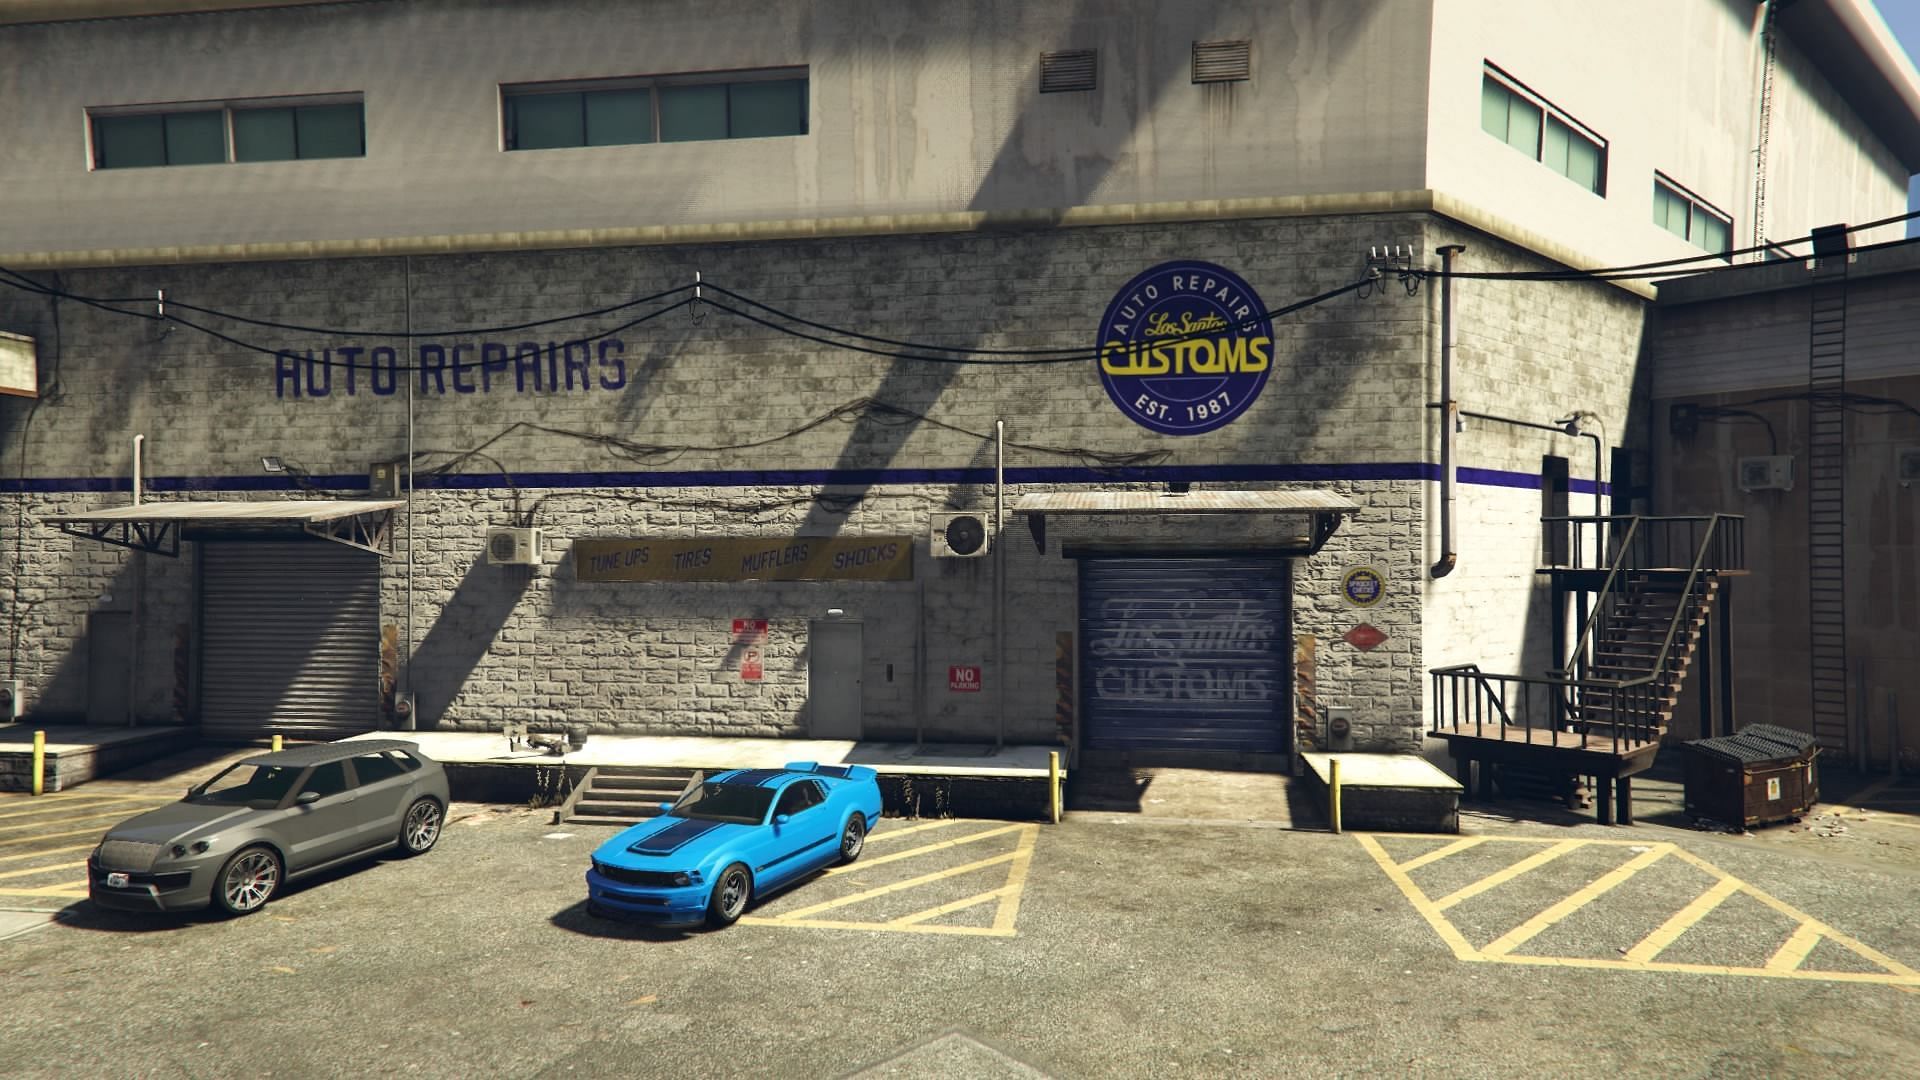 You cannot get this upgrade from Los Santos Customs by the time this article was written (Image via Rockstar Games)